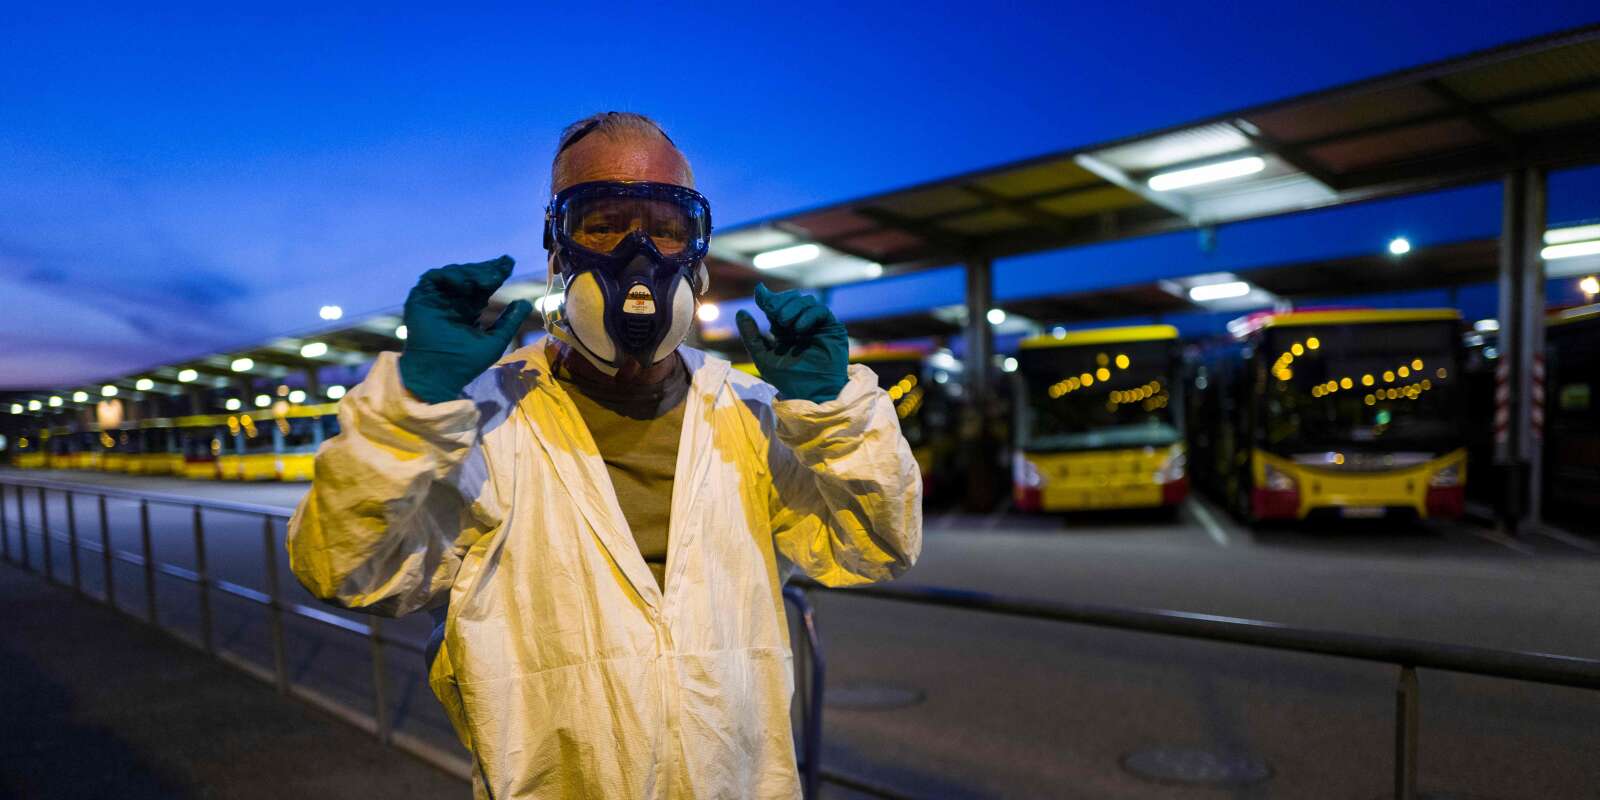 A worker puts on a protective suit and mask prior to disinfect a bus at the Solea transport depot in Mulhouse, eastern France, on May 20, 2020, as France eases lockdown measures taken to curb the spread of the COVID-19 pandemic, caused by the novel coronavirus. / AFP / SEBASTIEN BOZON